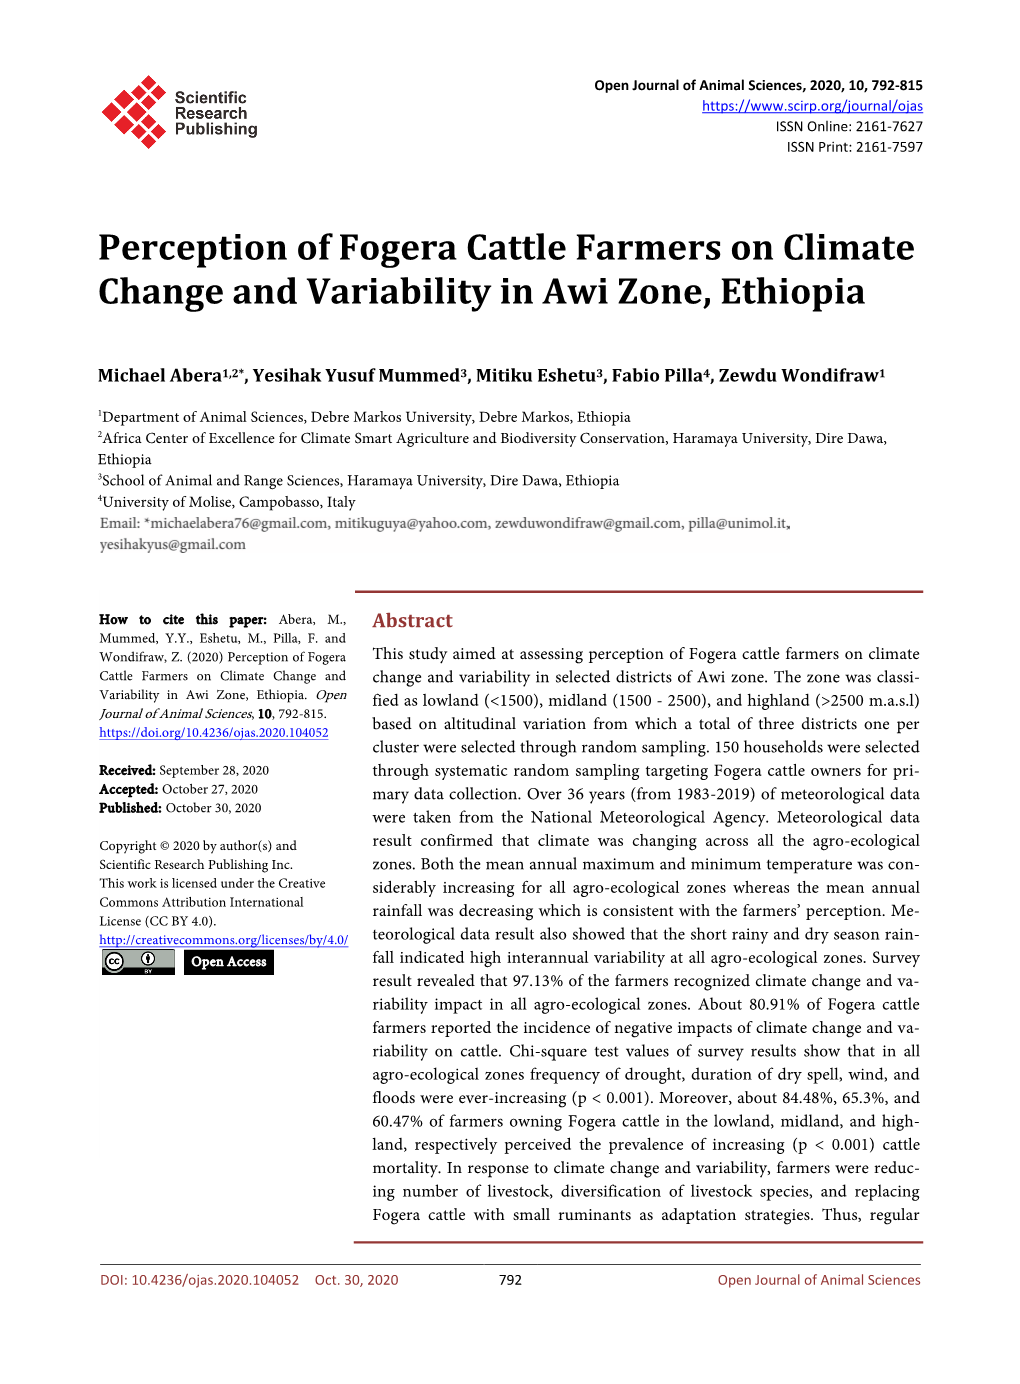 Perception of Fogera Cattle Farmers on Climate Change and Variability in Awi Zone, Ethiopia